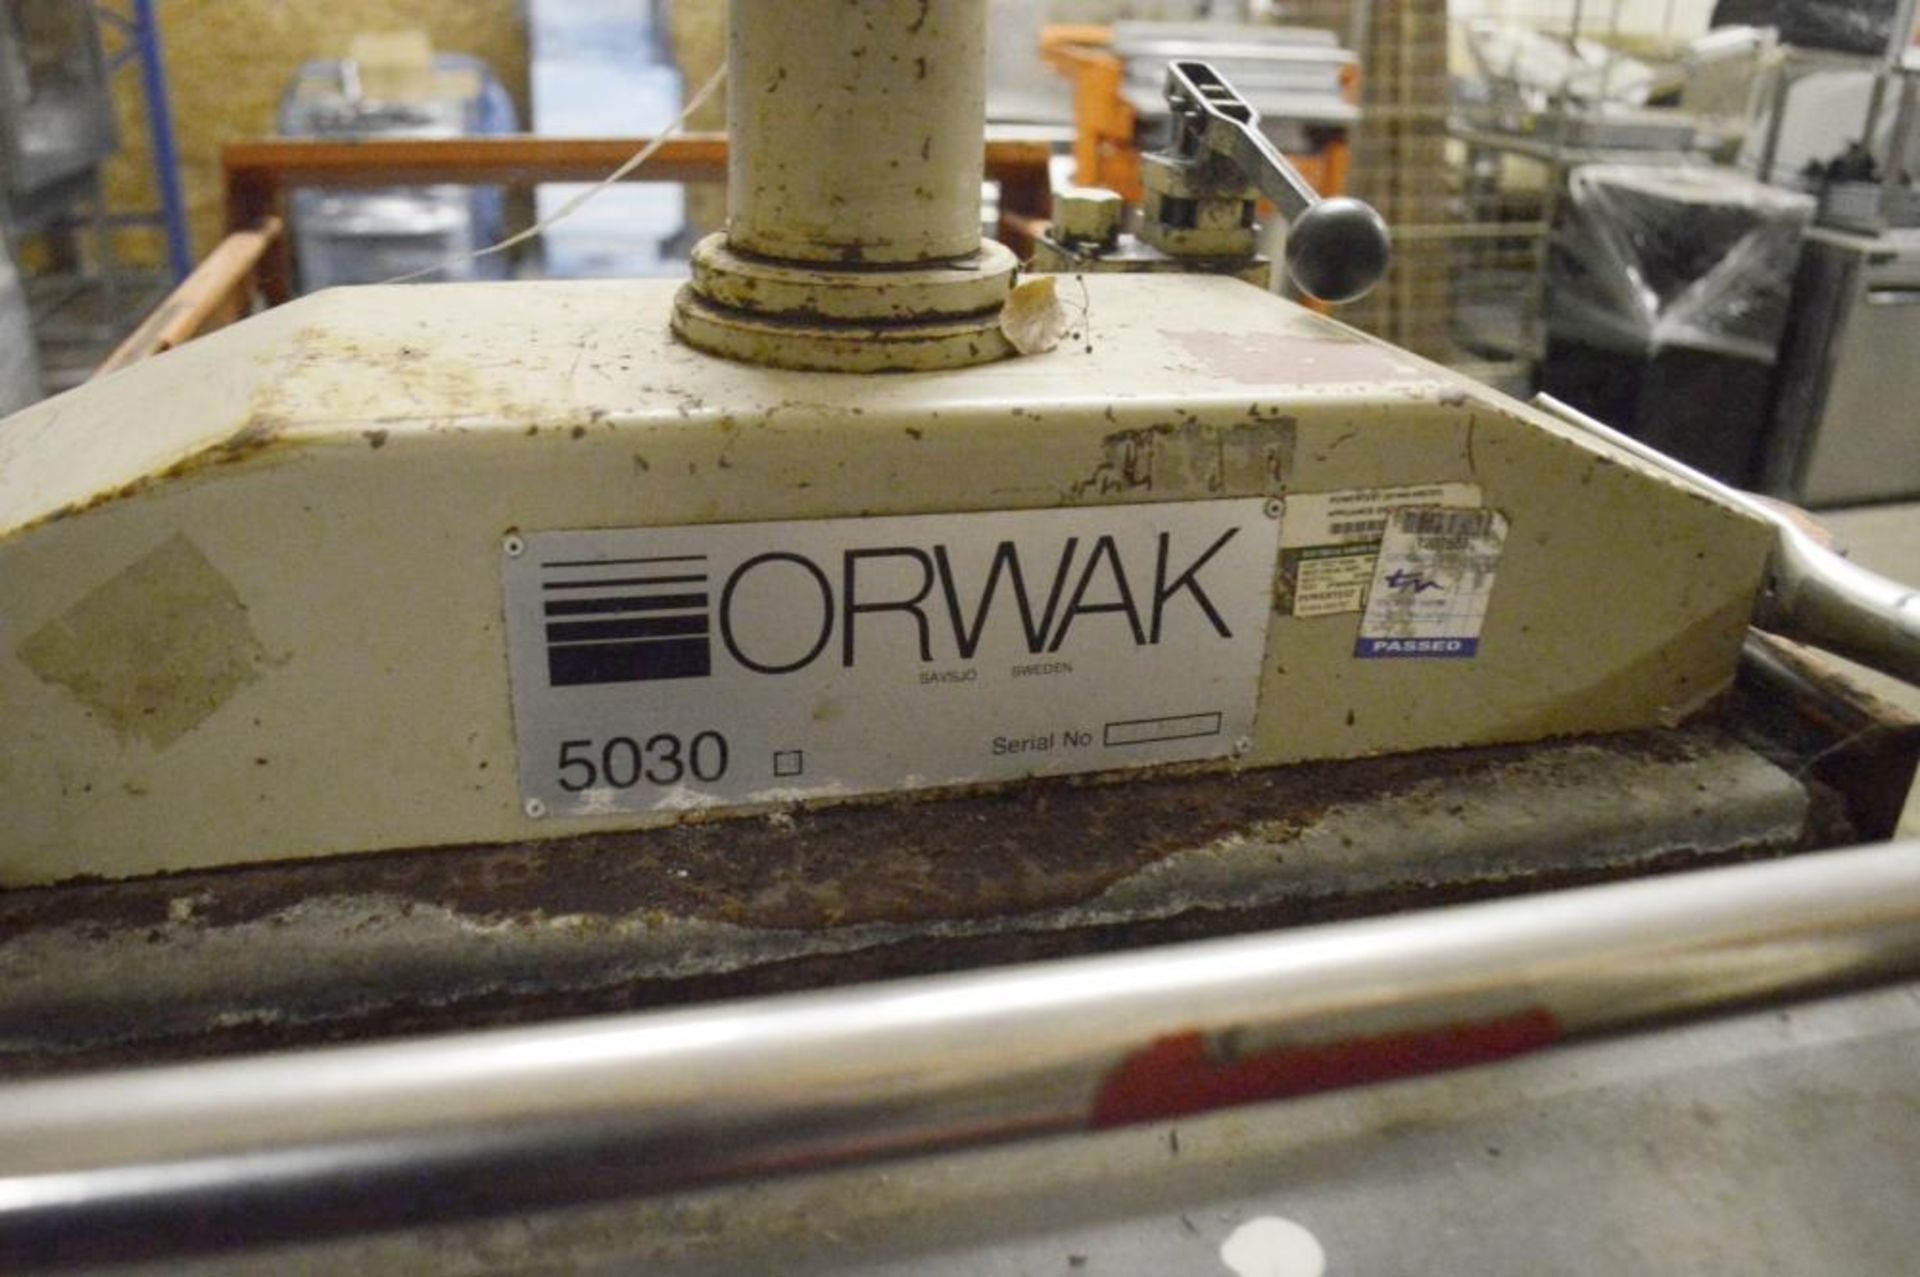 1 x Orwak 5030 Waste Compactor - Used For Compacting Recyclable or Non-Recyclable Waste - Red - Image 3 of 6